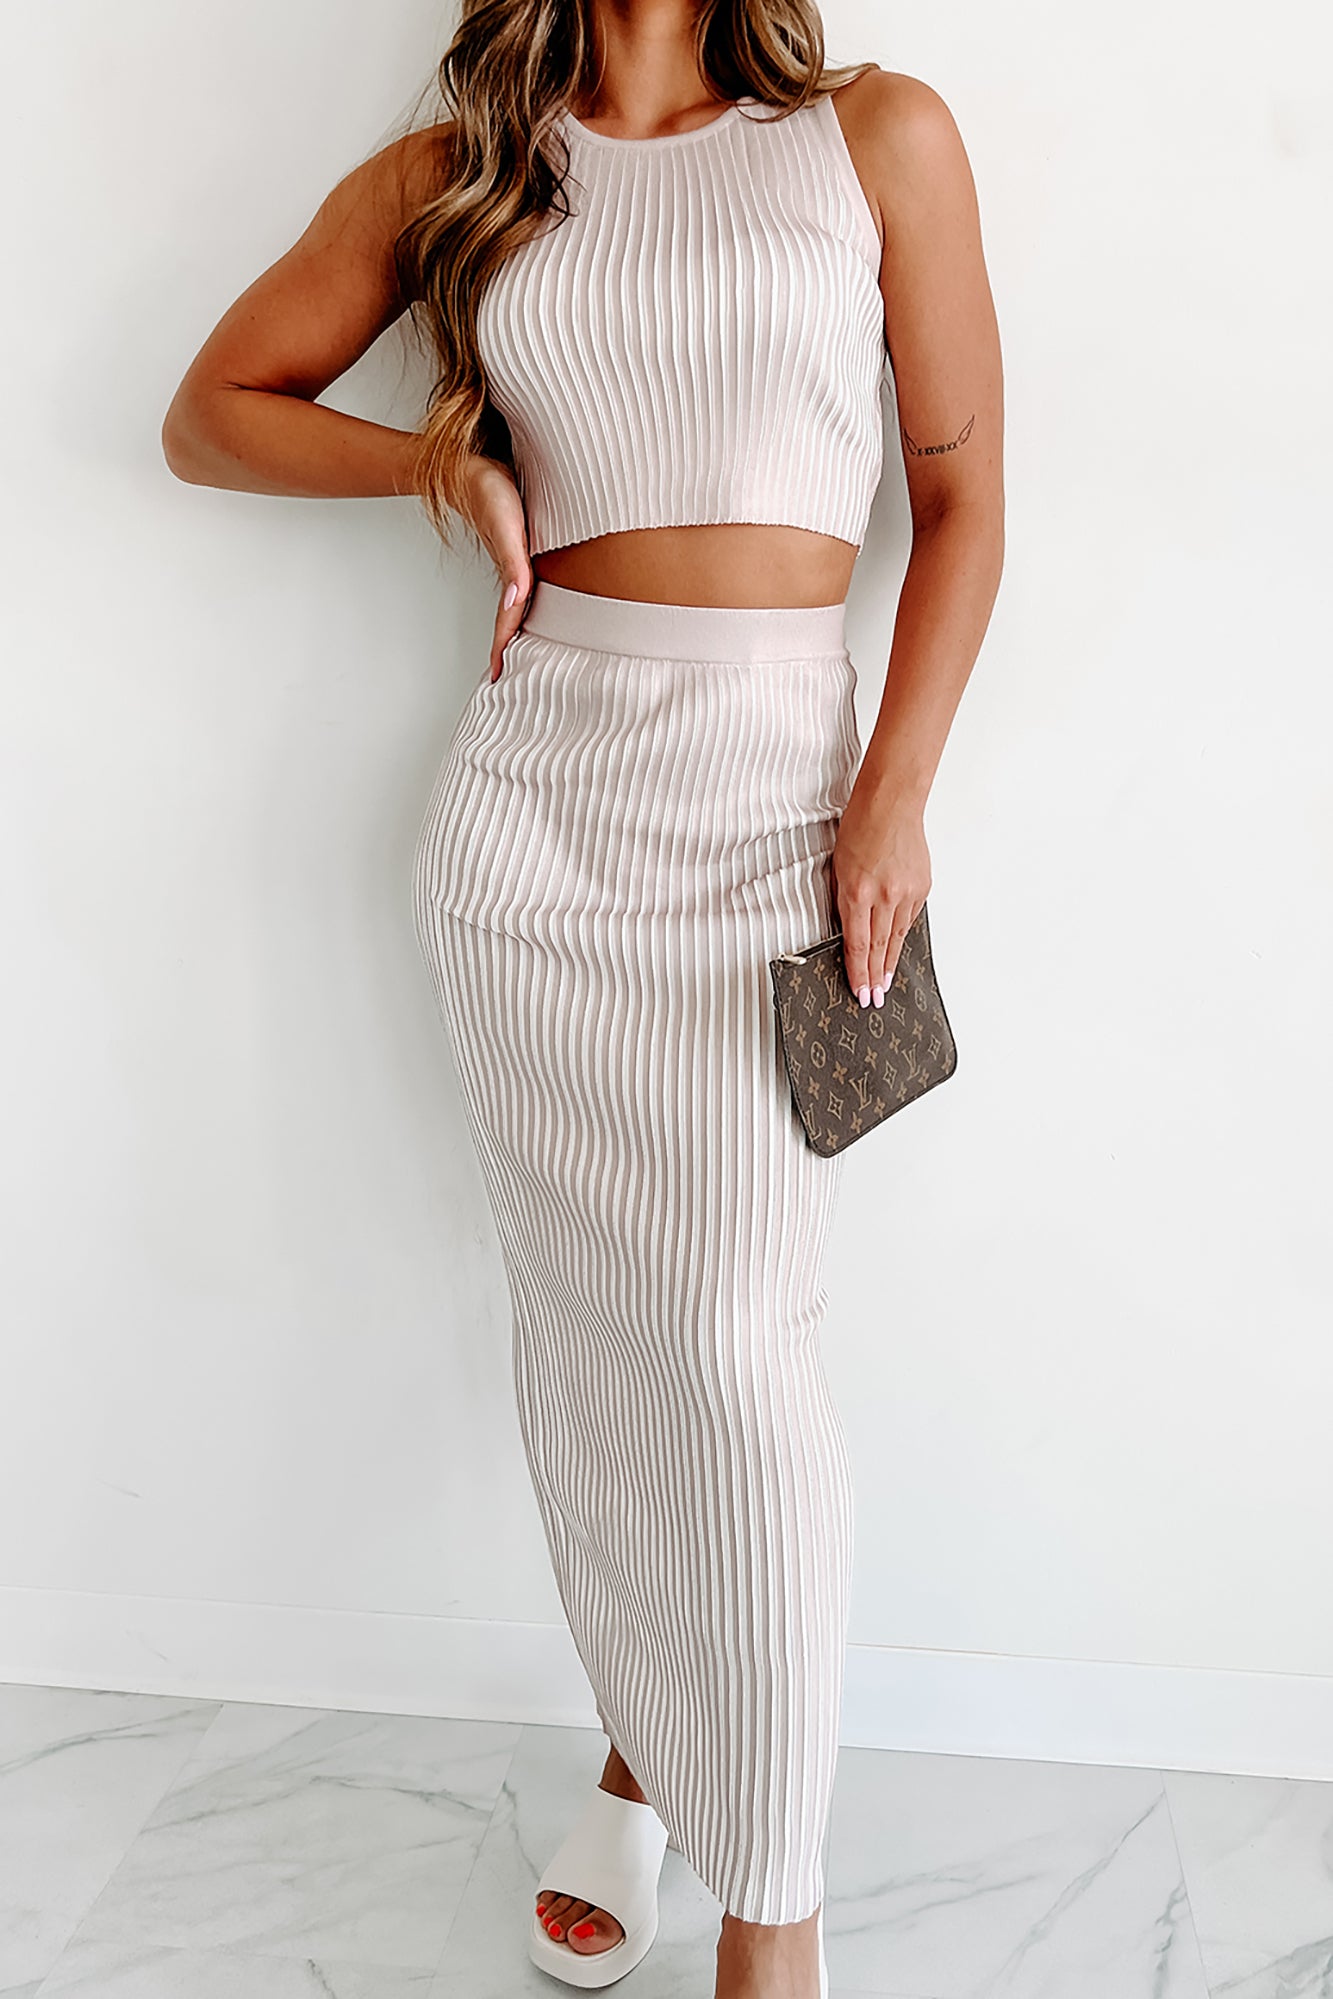 Dream Without Fear Ribbed Crop Top & Maxi Skirt Set (Nude) - NanaMacs